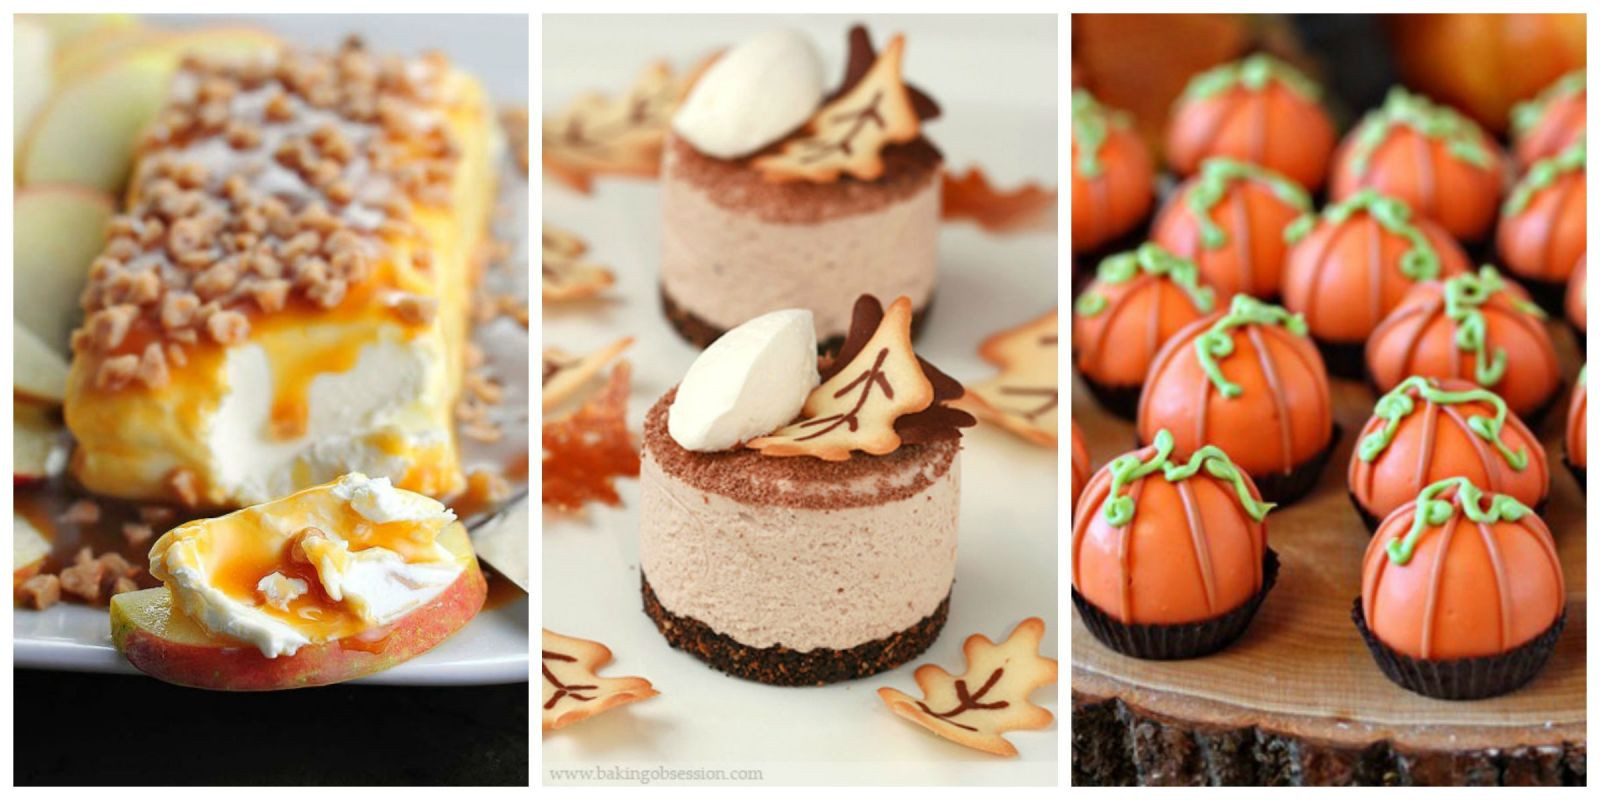 Recipes For Fall Desserts
 35 Easy Fall Dessert Recipes Best Treats for Autumn Parties